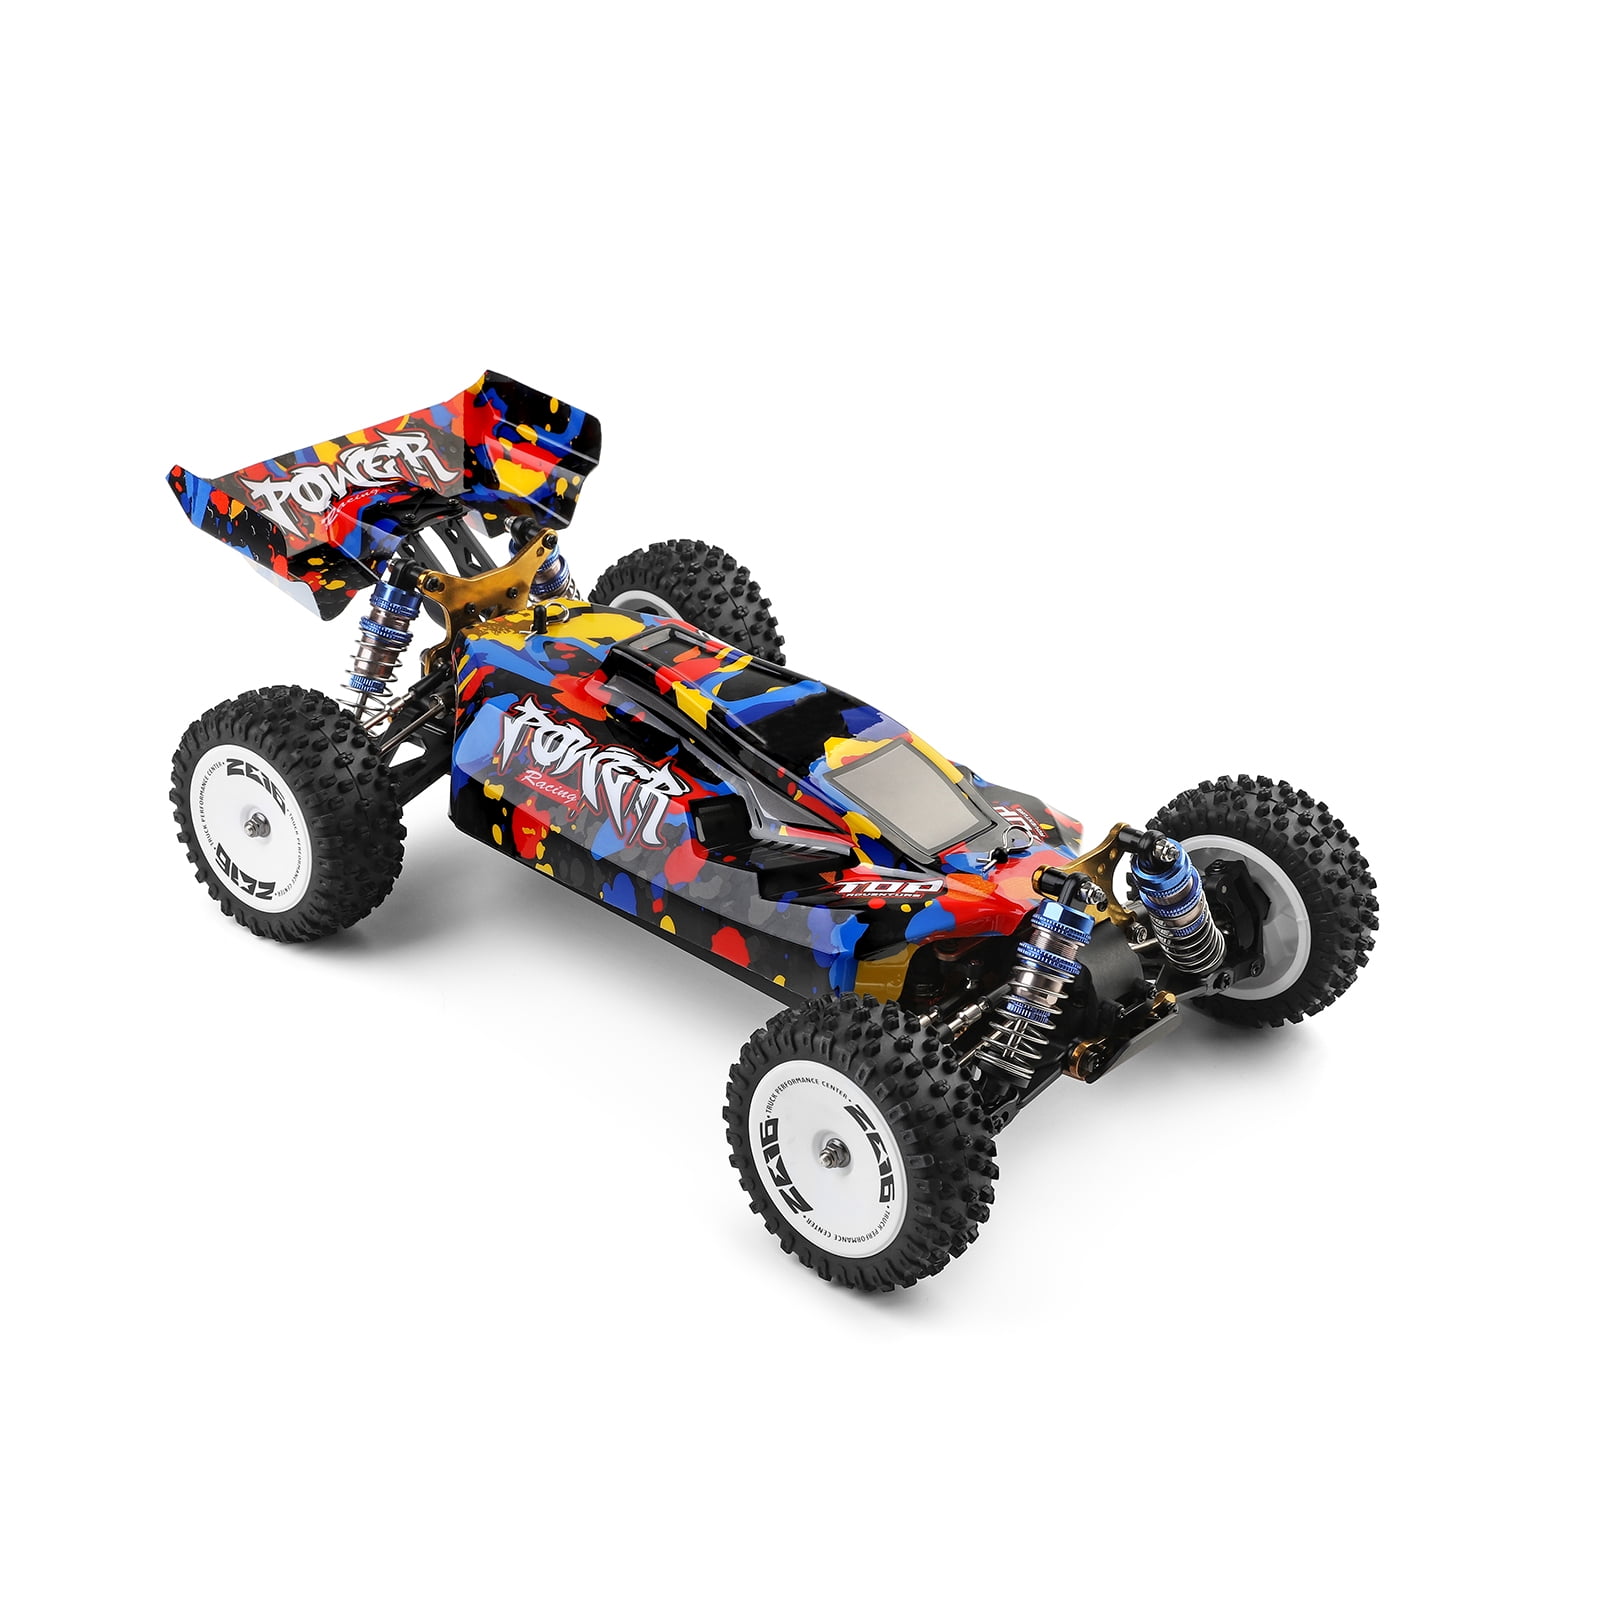 Wltoys XKS 124007 Remote Control Car 112 2.4GHz 75KMH High Speed Off Road  Trucks Brushless Motor Metal Chassis 4WD Vehicle Racing Climbing Car Gifts  